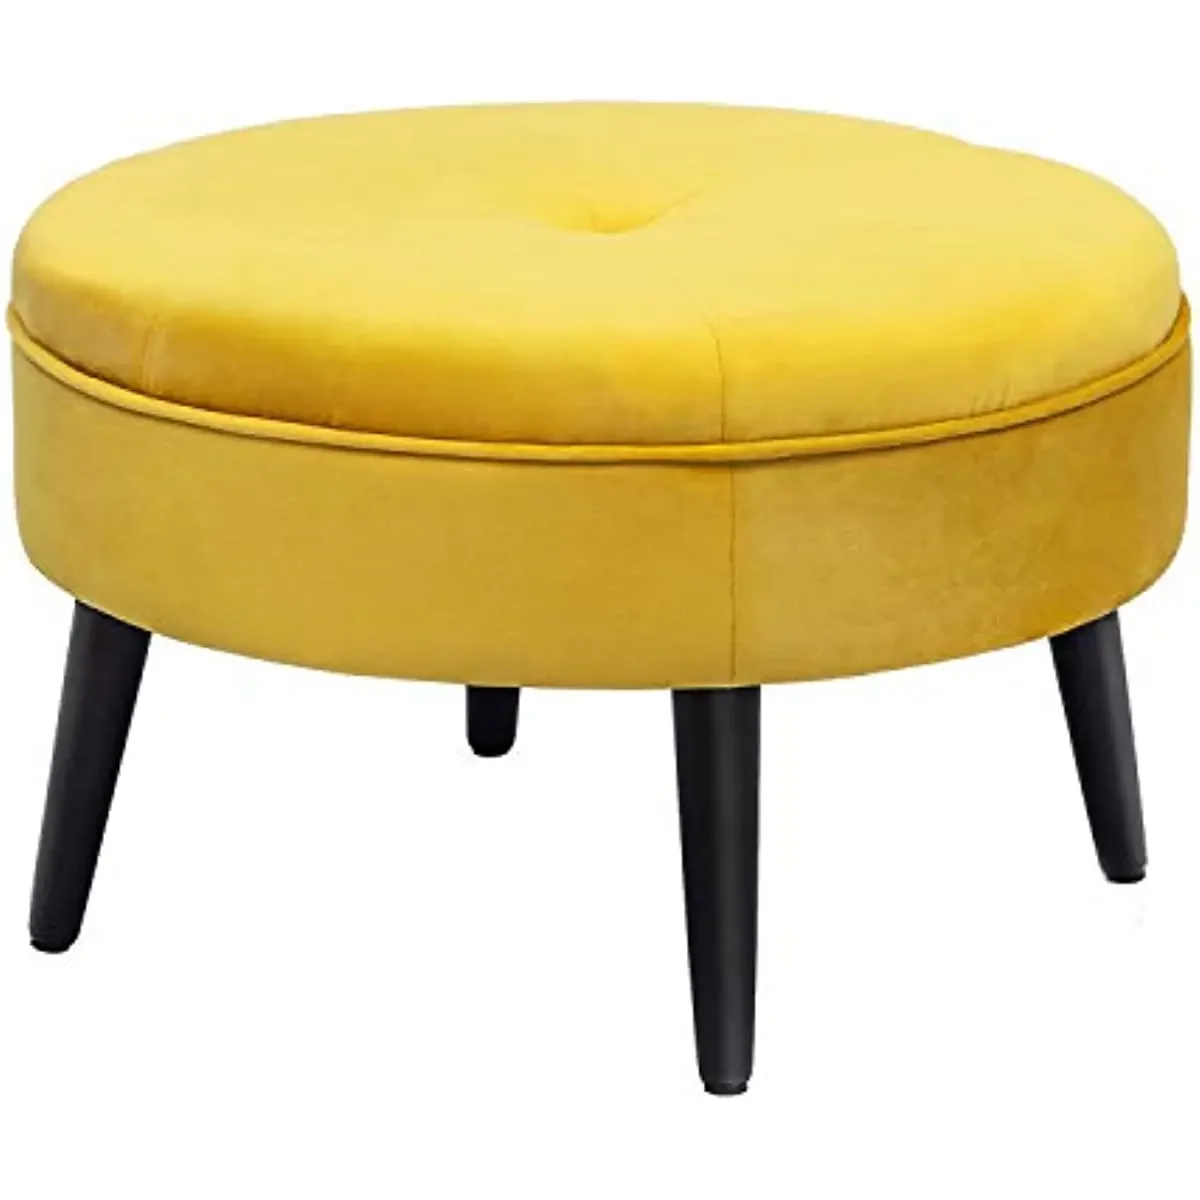 

23" Round Velvet Footrest Stool, Upholstered Ottoman Coffee Table, Button Tufted Padded Foot Stools with Solid Wood Legs, Glassy